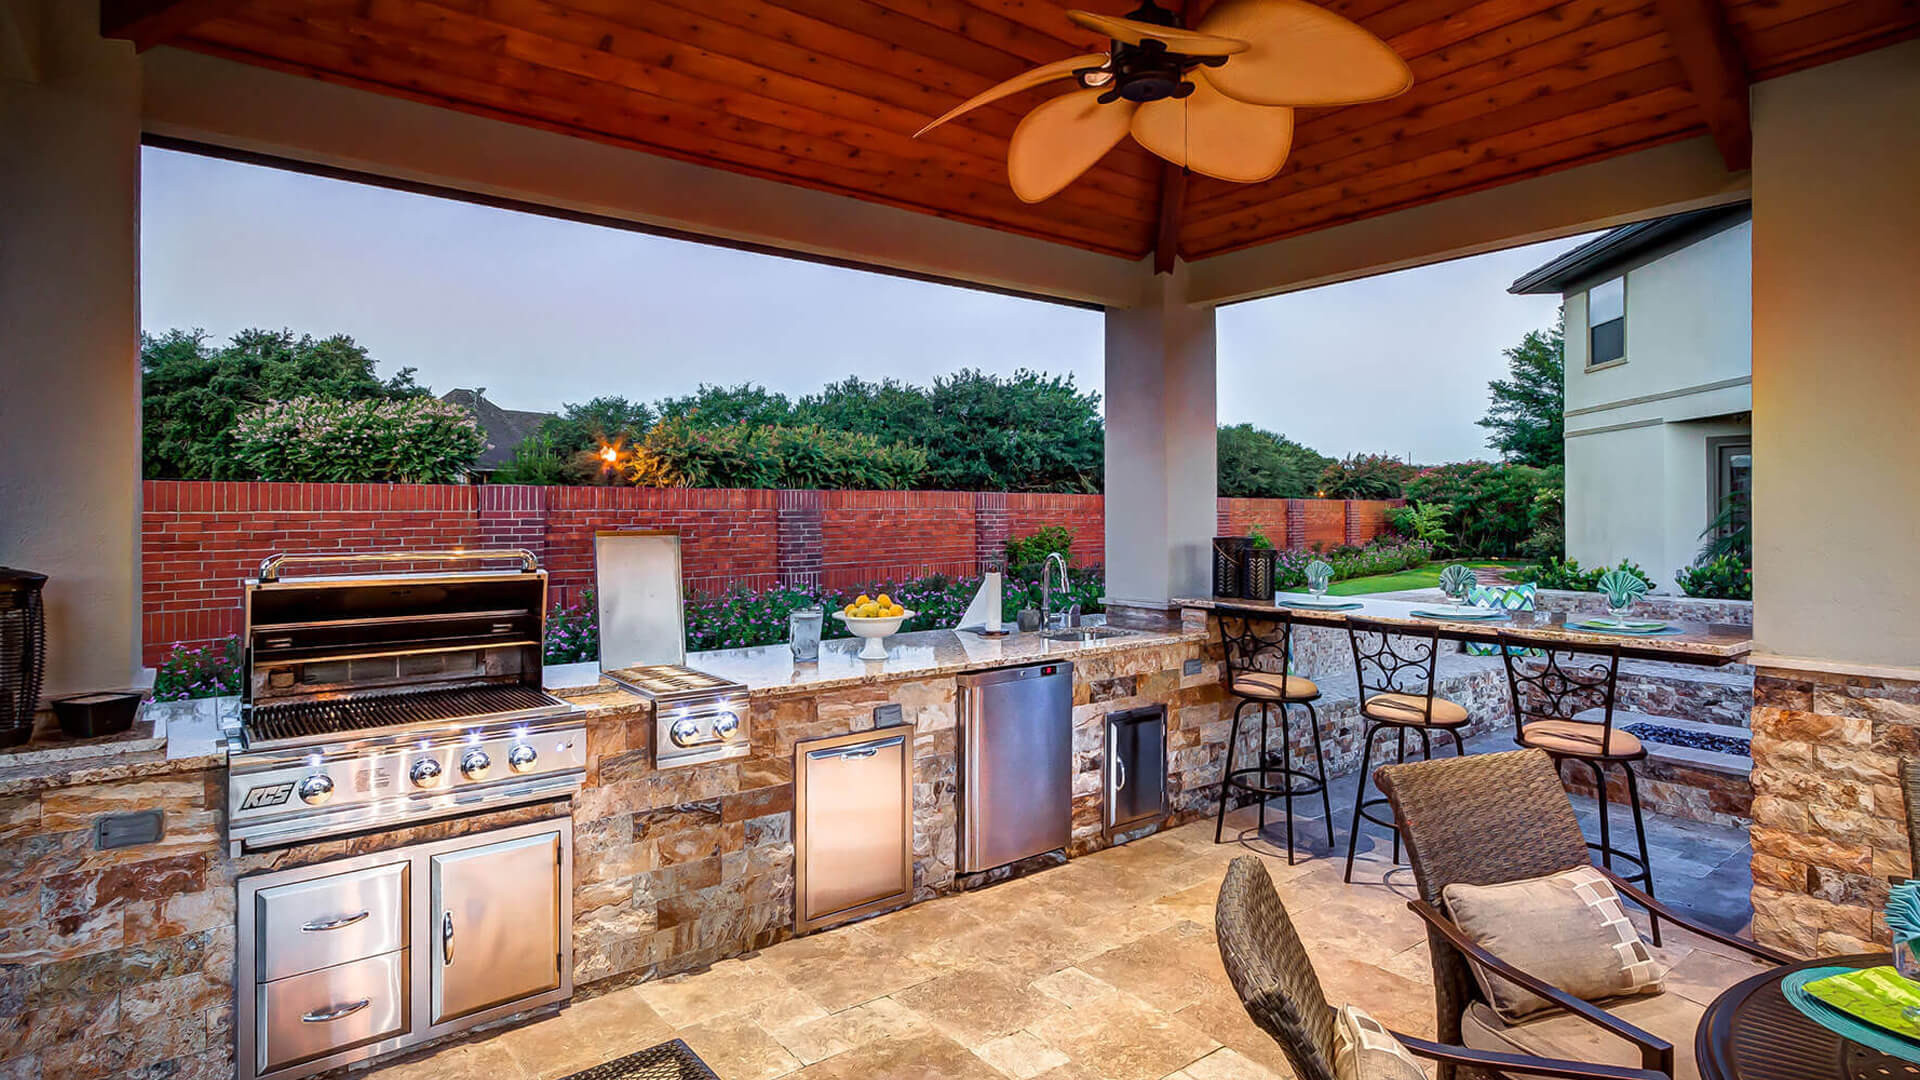 Covered Outdoor Kitchen Plans
 10 Outdoor Kitchen Ideas Creekstone Outdoor Living